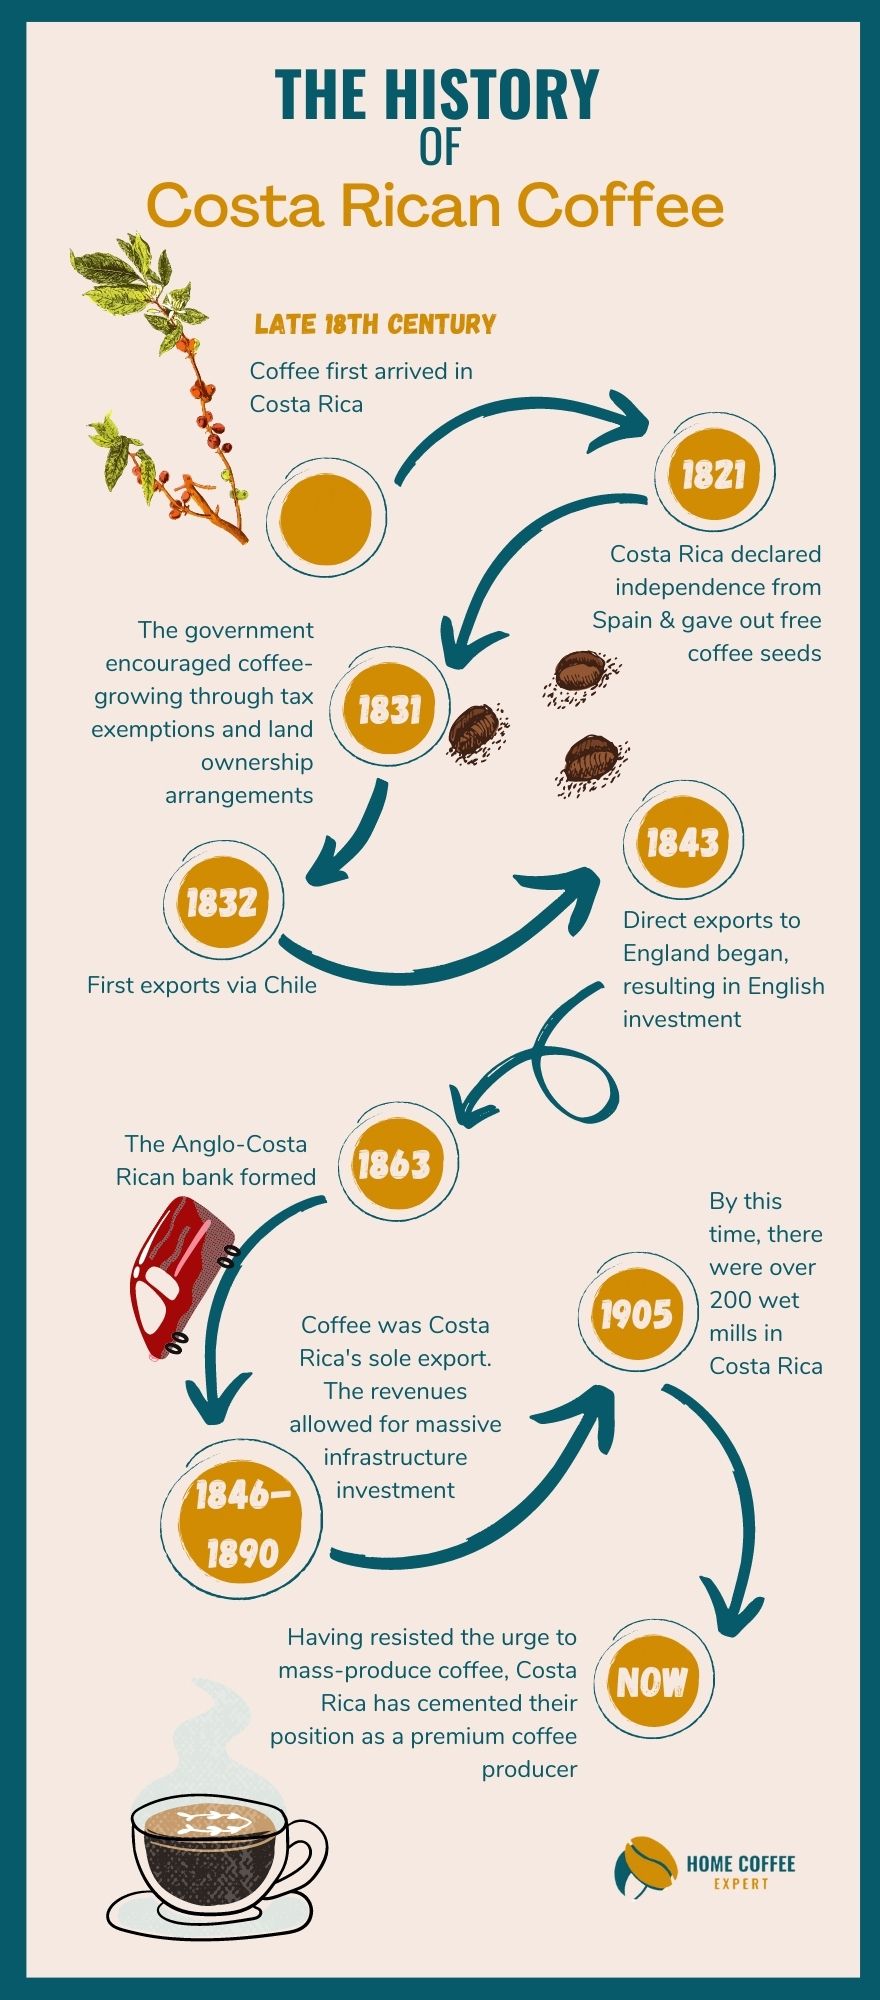 The history of coffee in Costa Rica - Infographic